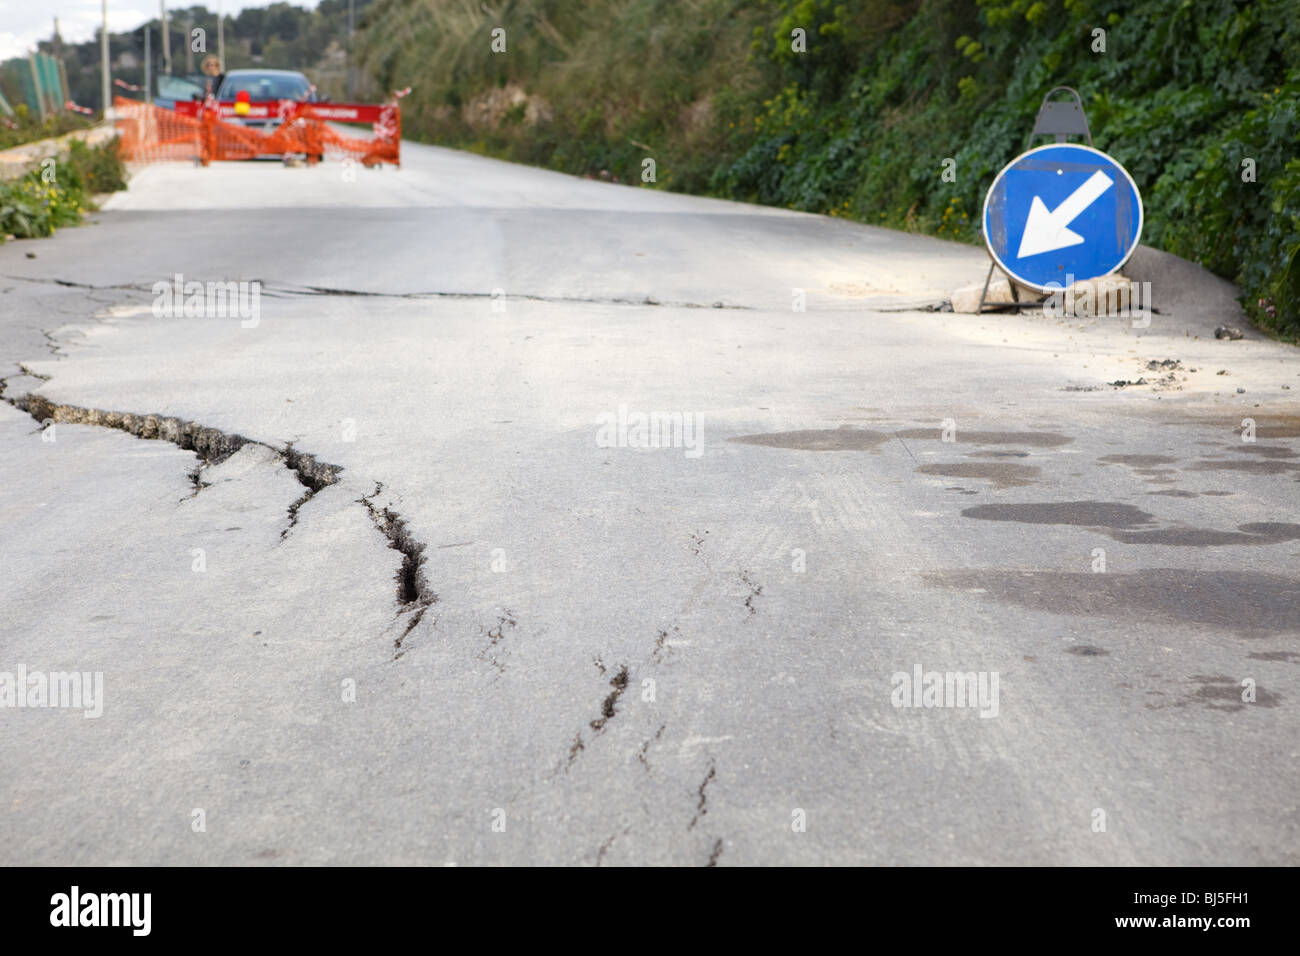 Washed out and damaged road with blue traffic sign pointing direction to attract attention Stock Photo